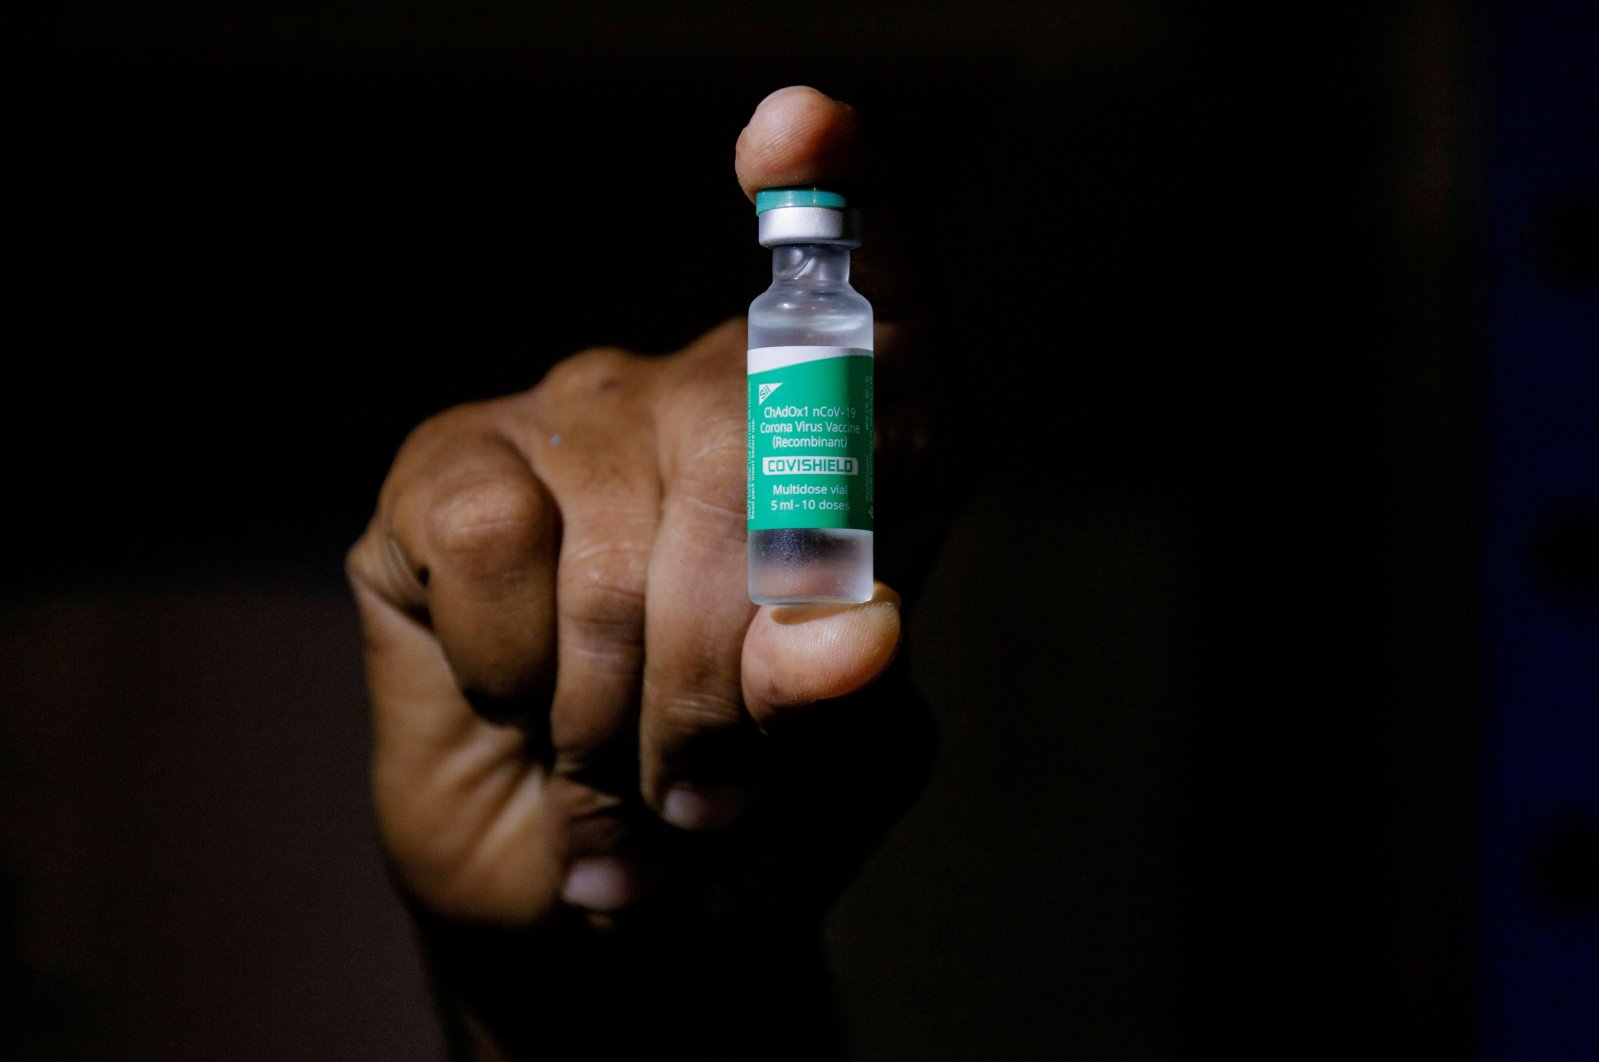 A man displays a vial of AstraZeneca's COVISHIELD vaccine as the country receives its first batch of COVID-19 vaccines under the COVAX scheme, in Accra, Ghana, Feb. 24, 2021. (Reuters Photo)